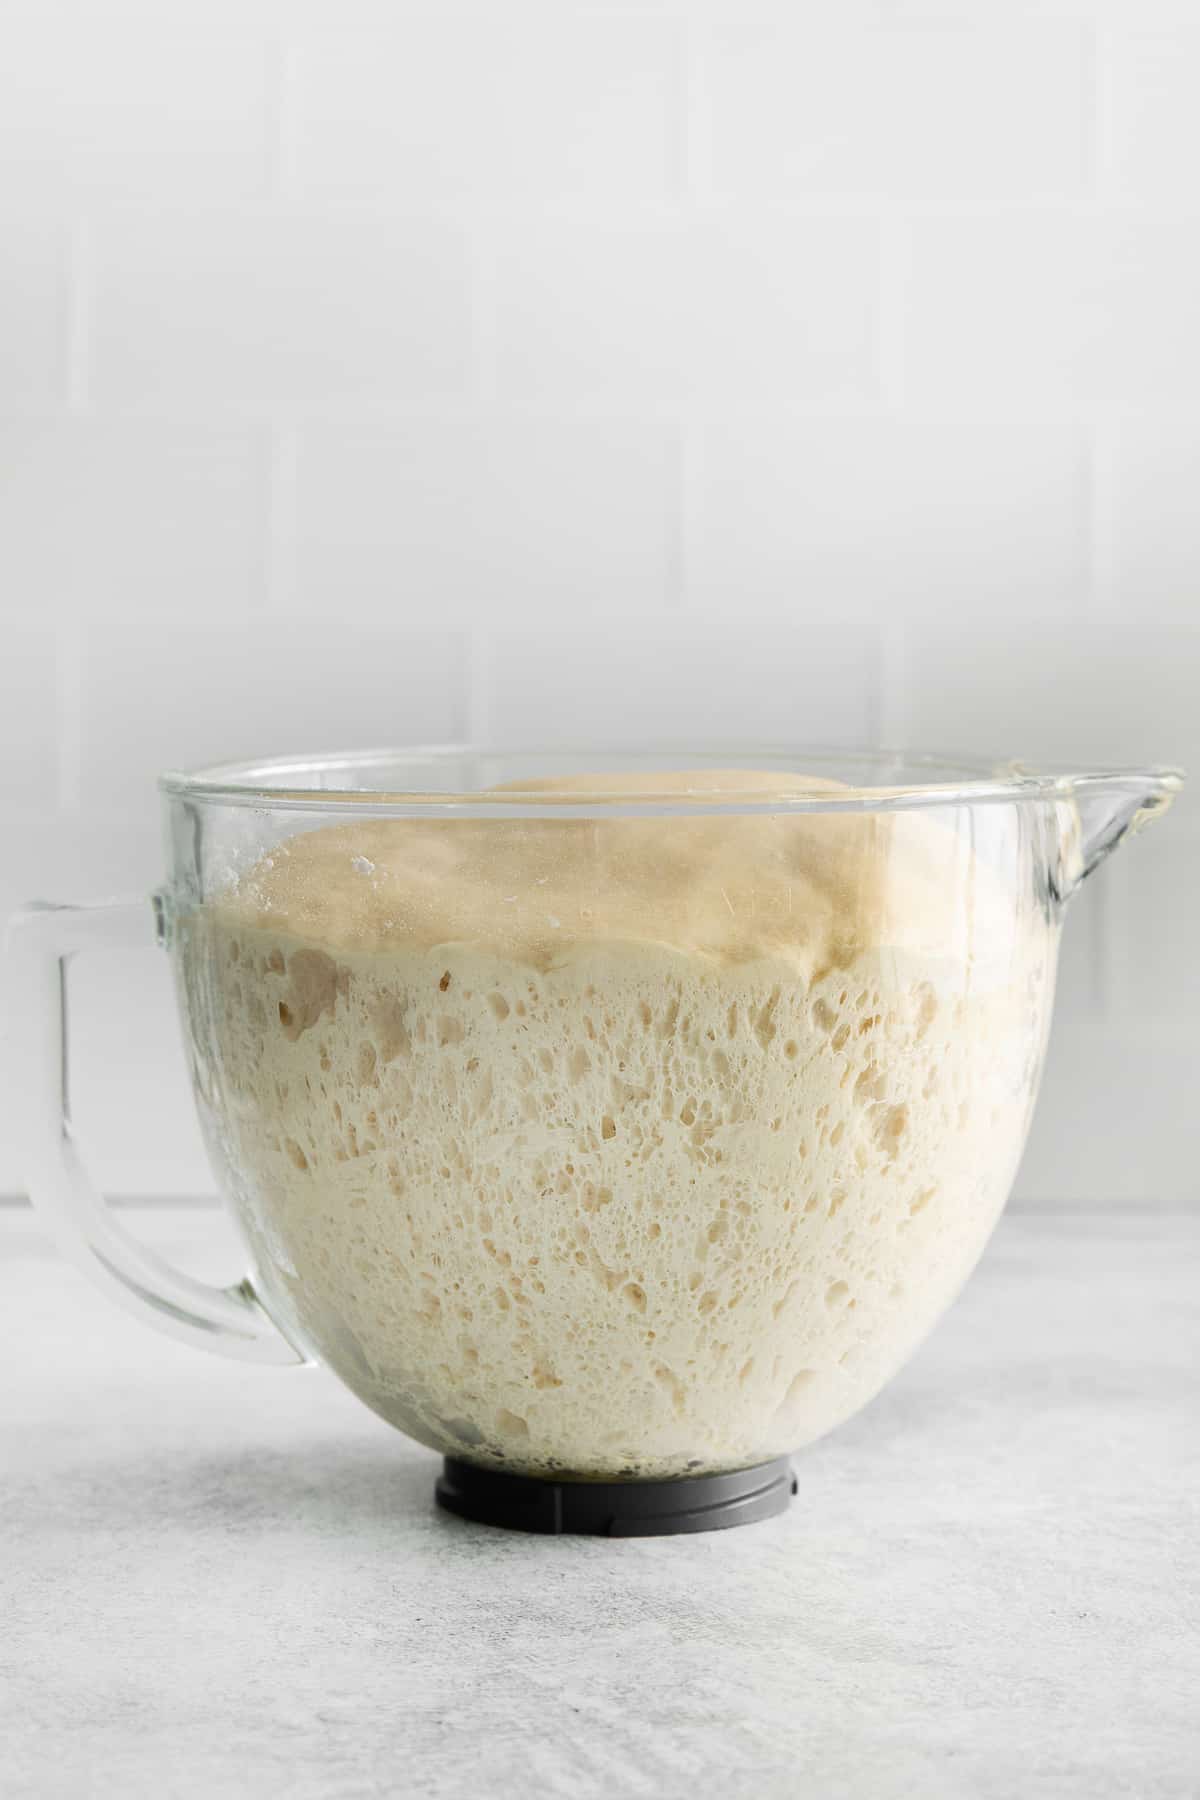 The dough doubled in size in a bowl.